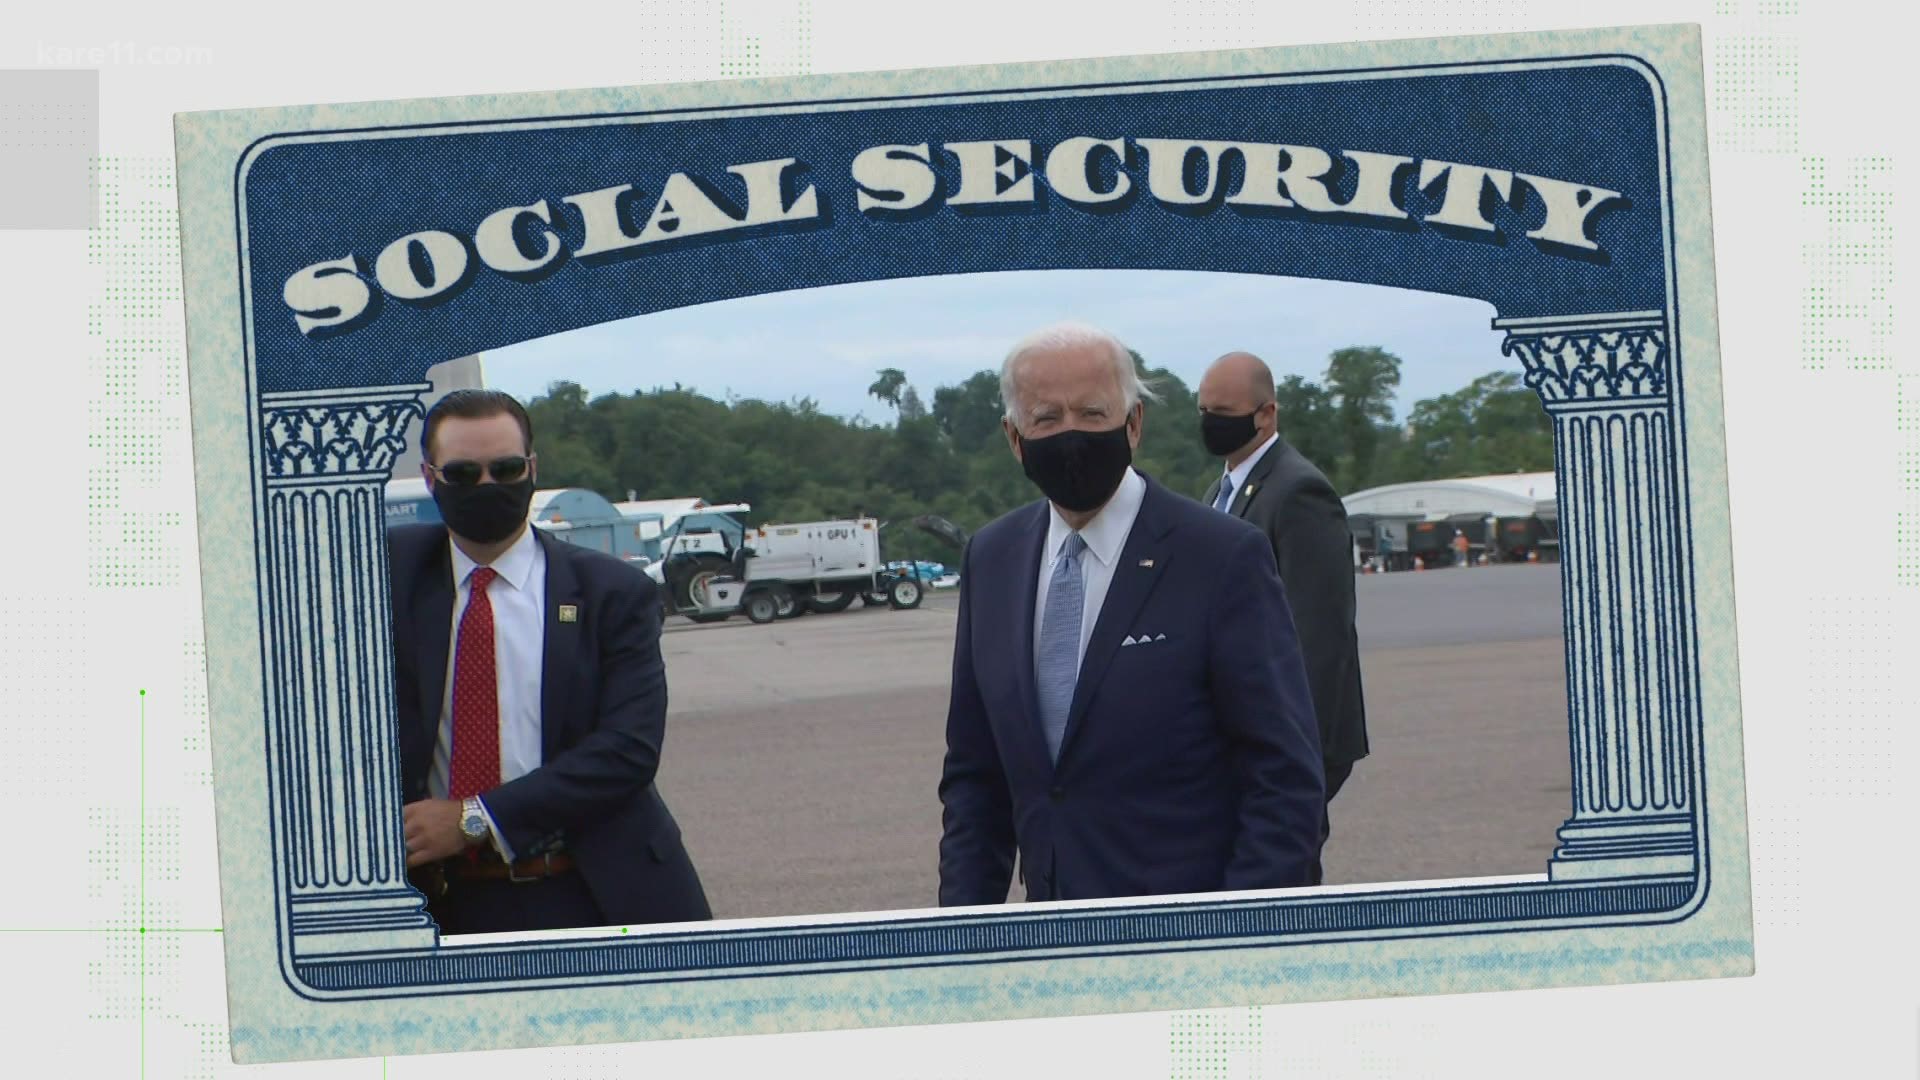 Former VP Joe Biden claims Social Security will run out of money in 2023 if President Trump gets his way. In this Verify report we get to the bottom of that claim.